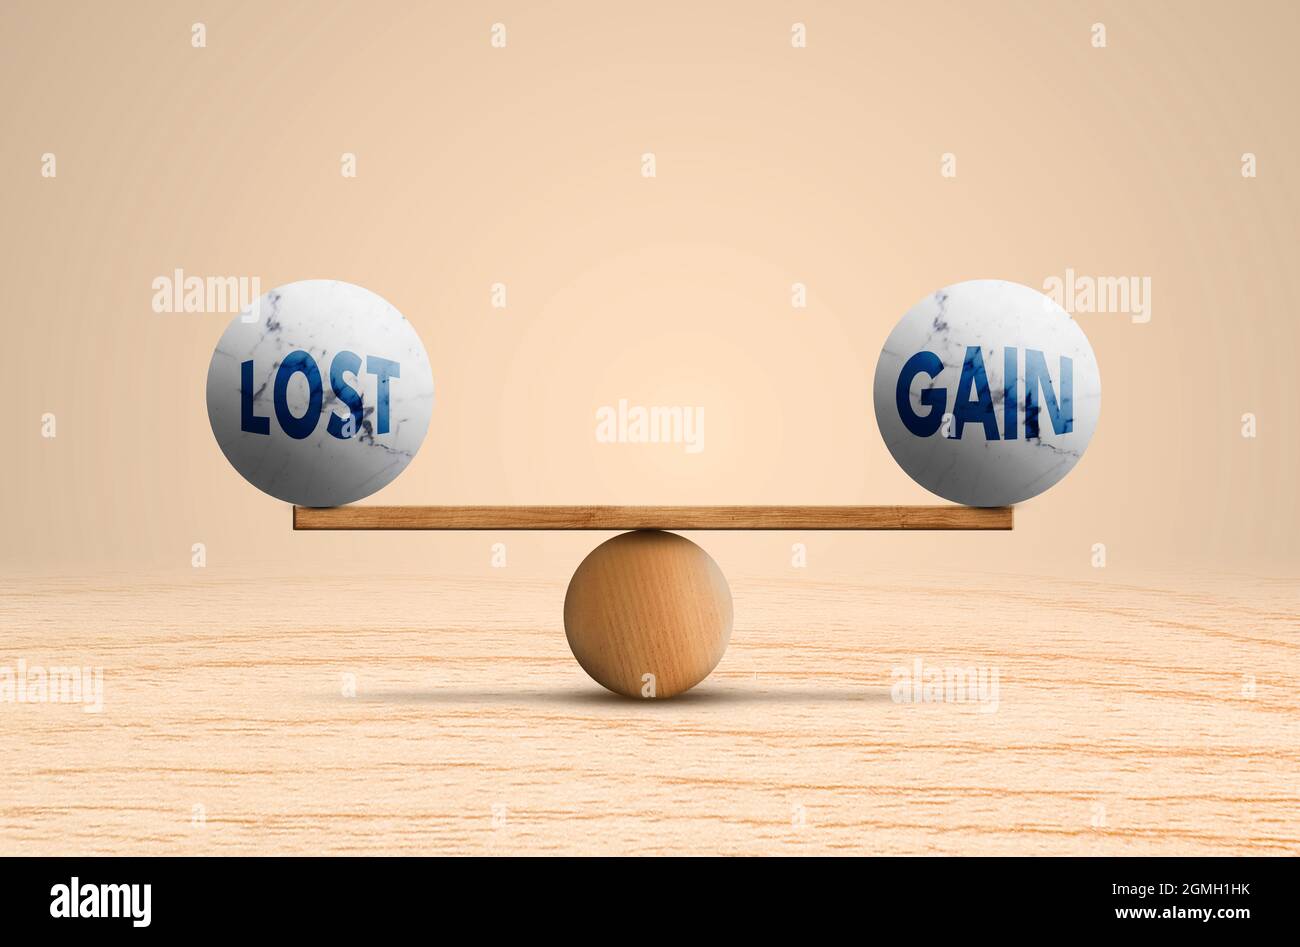 Lost and Gain On Ideal balance in Wooden scale on wood floor and brown background. Gain lost Equilibrium. Profits and costs concept Idea Stock Photo